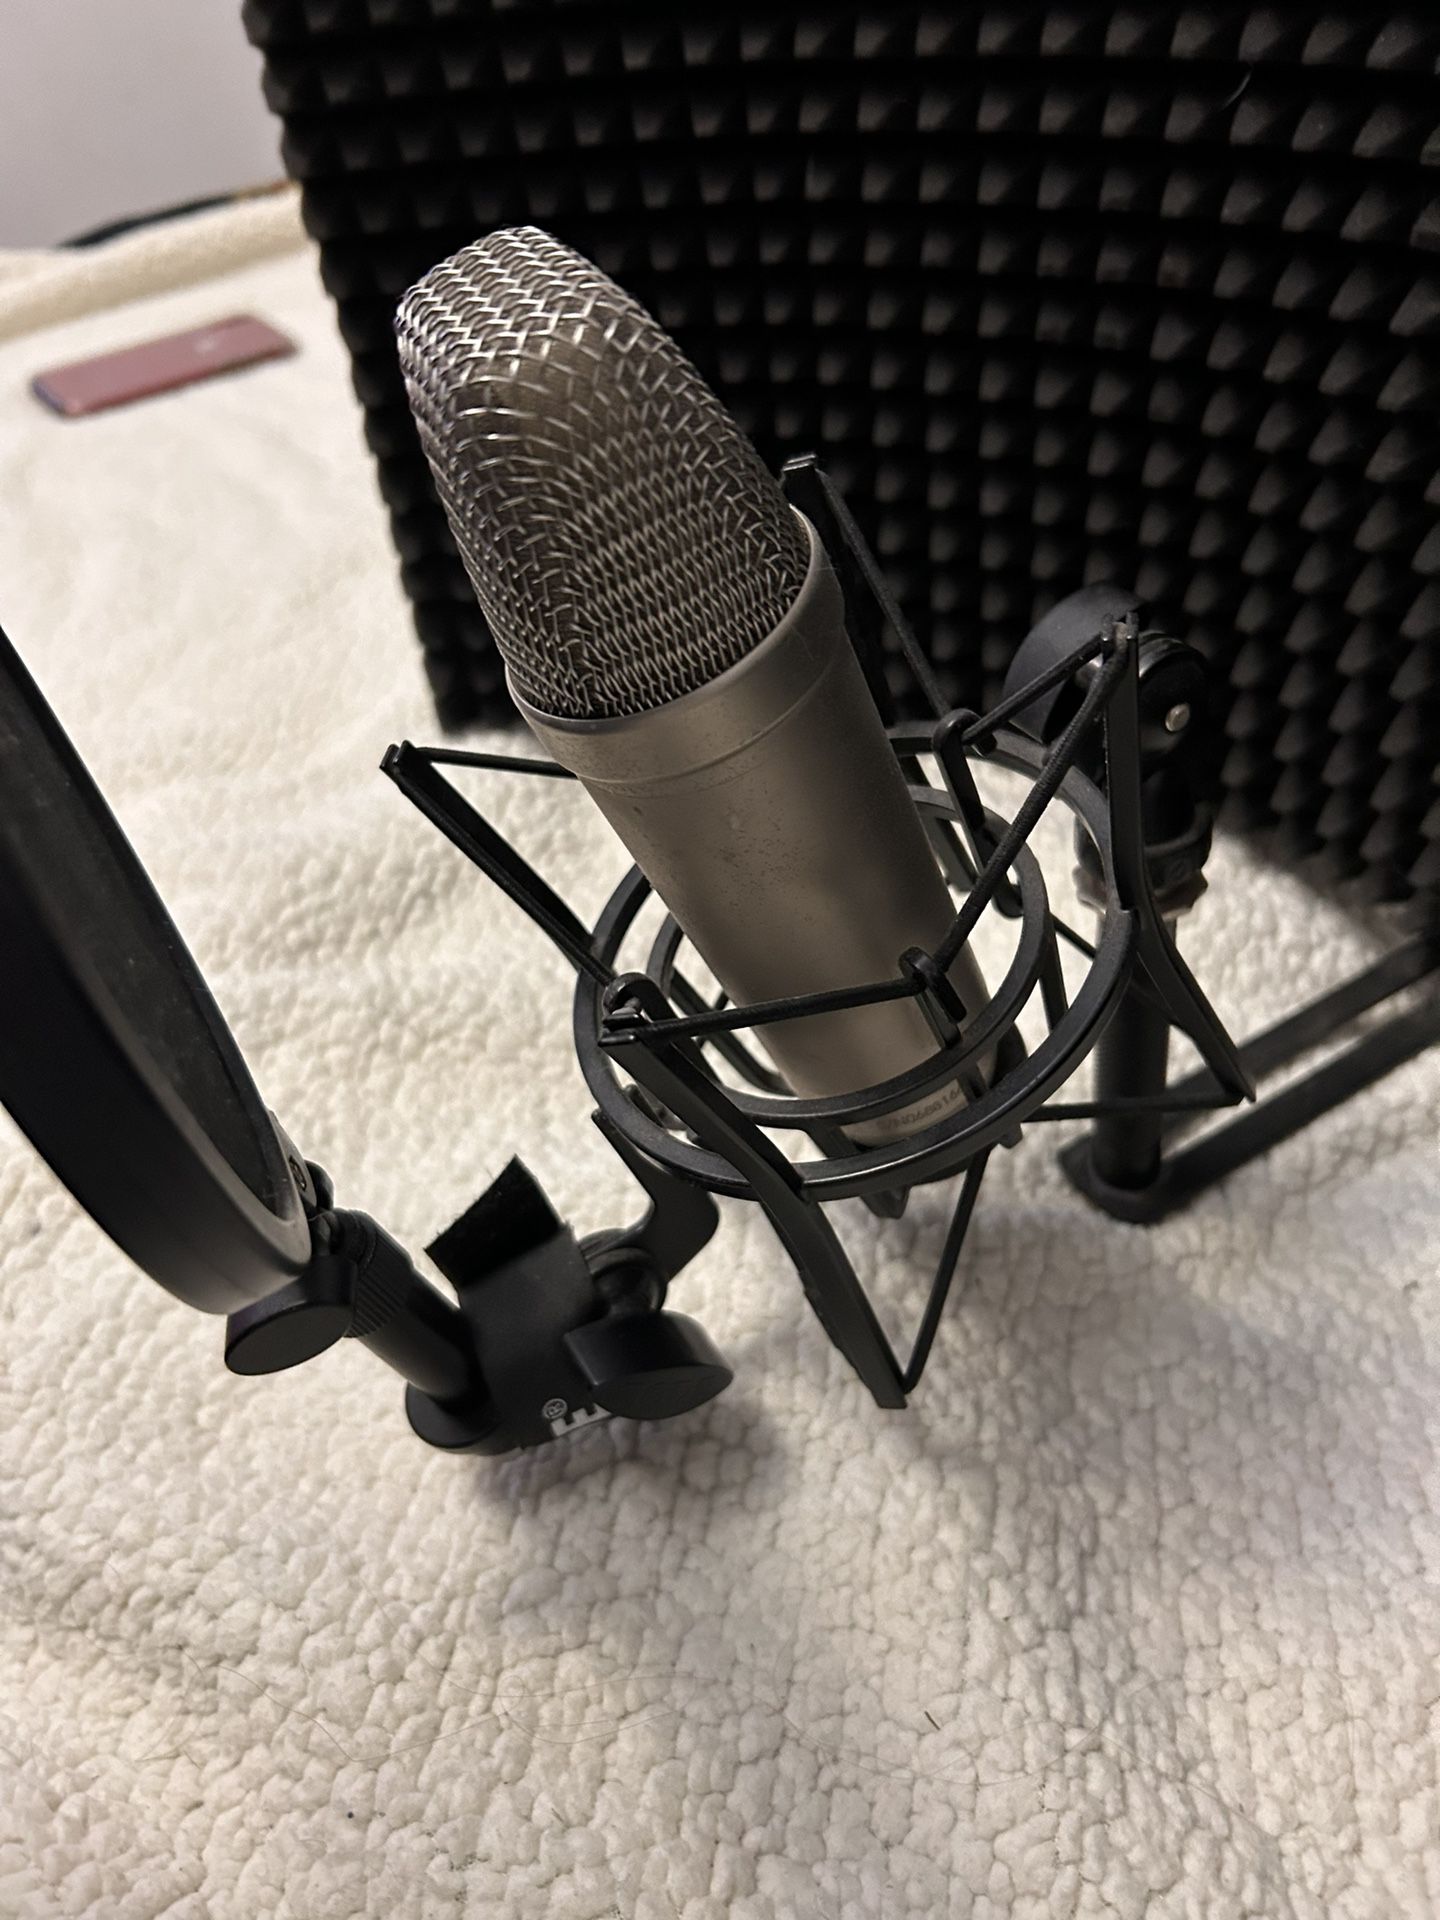 Rode Nt1A Condenser Microphone 